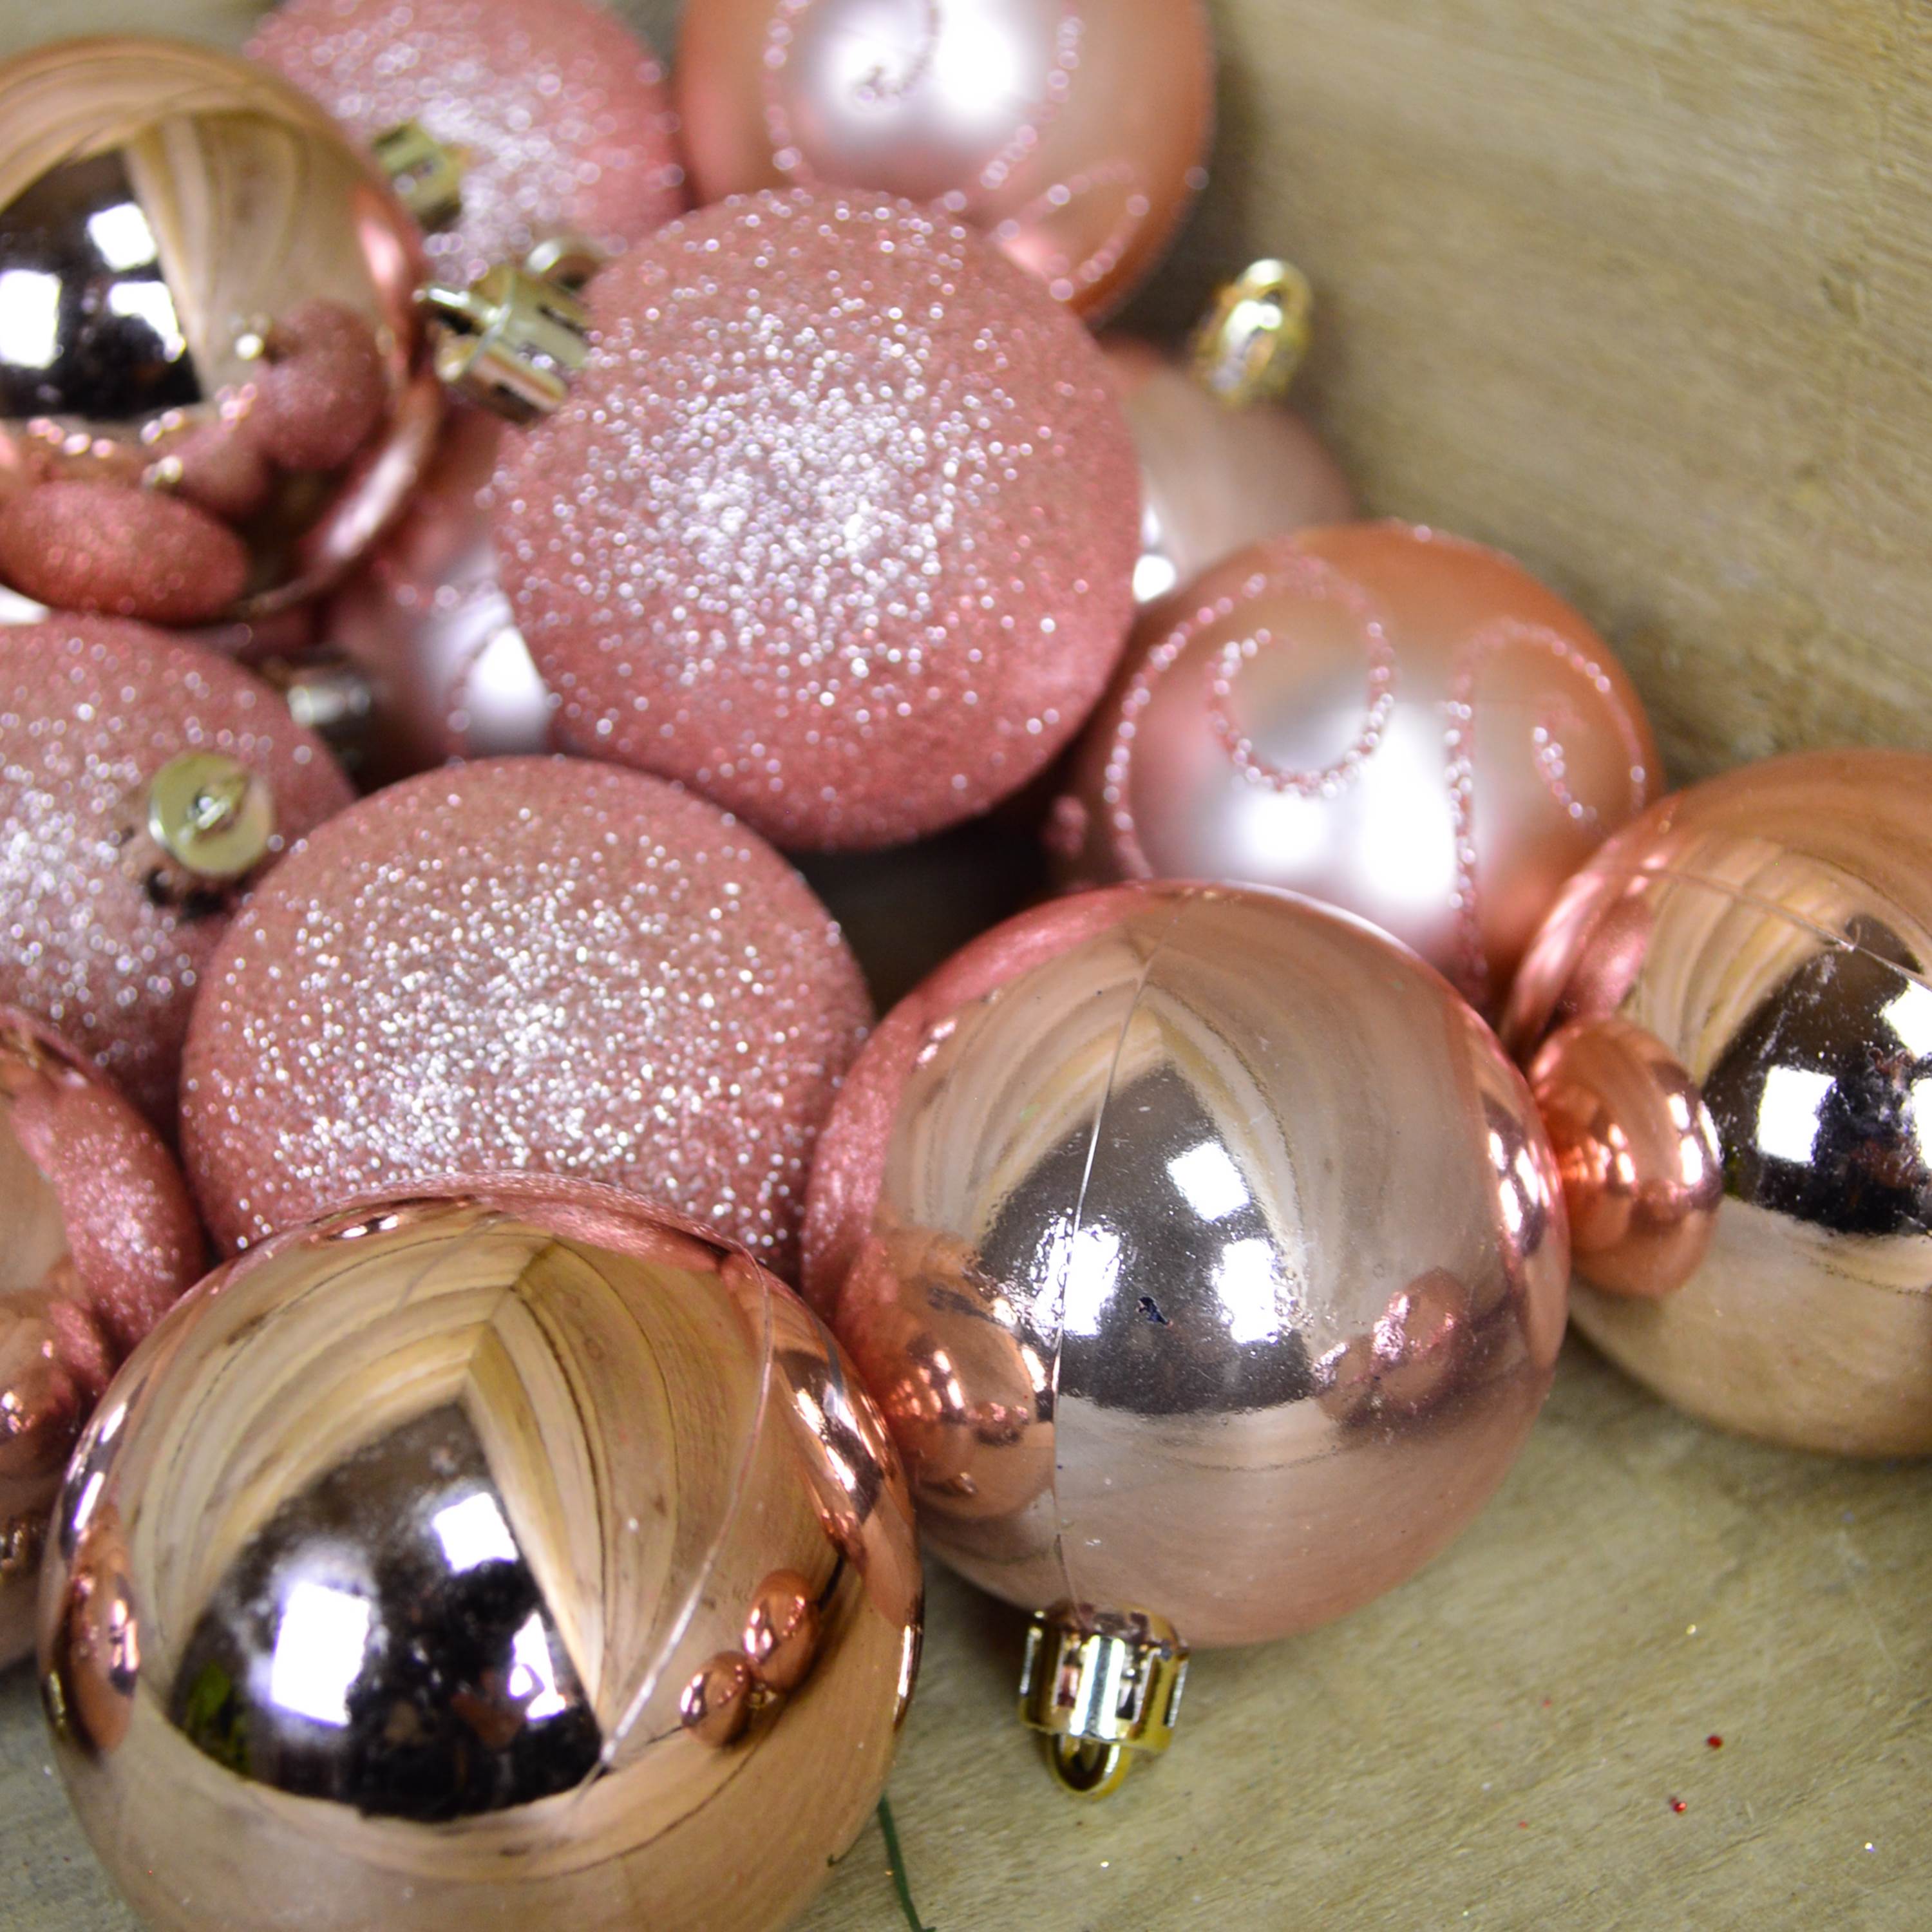 24 Pack 6cm Christmas Tree Baubles 4 Mixed Designs - Rose Gold / Pink